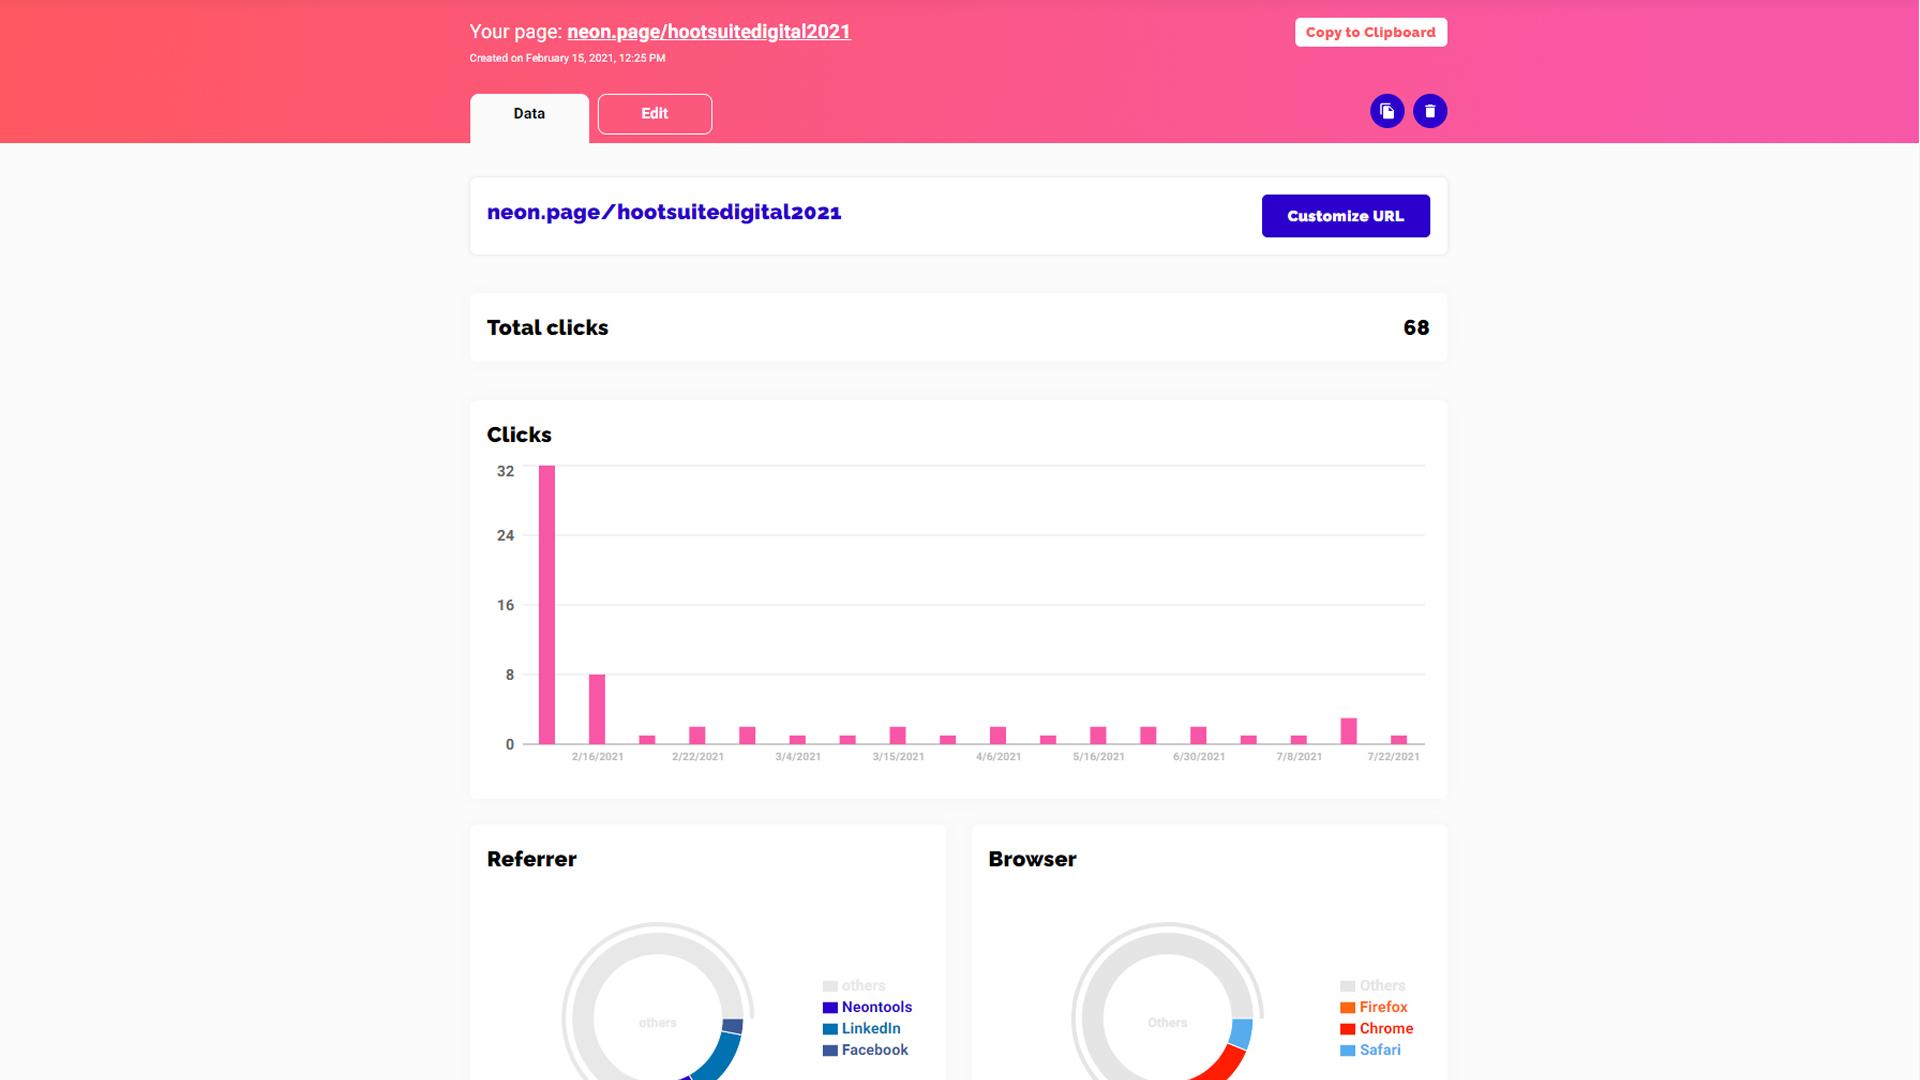 Neontools - Analytics example of your neon.page engagement.